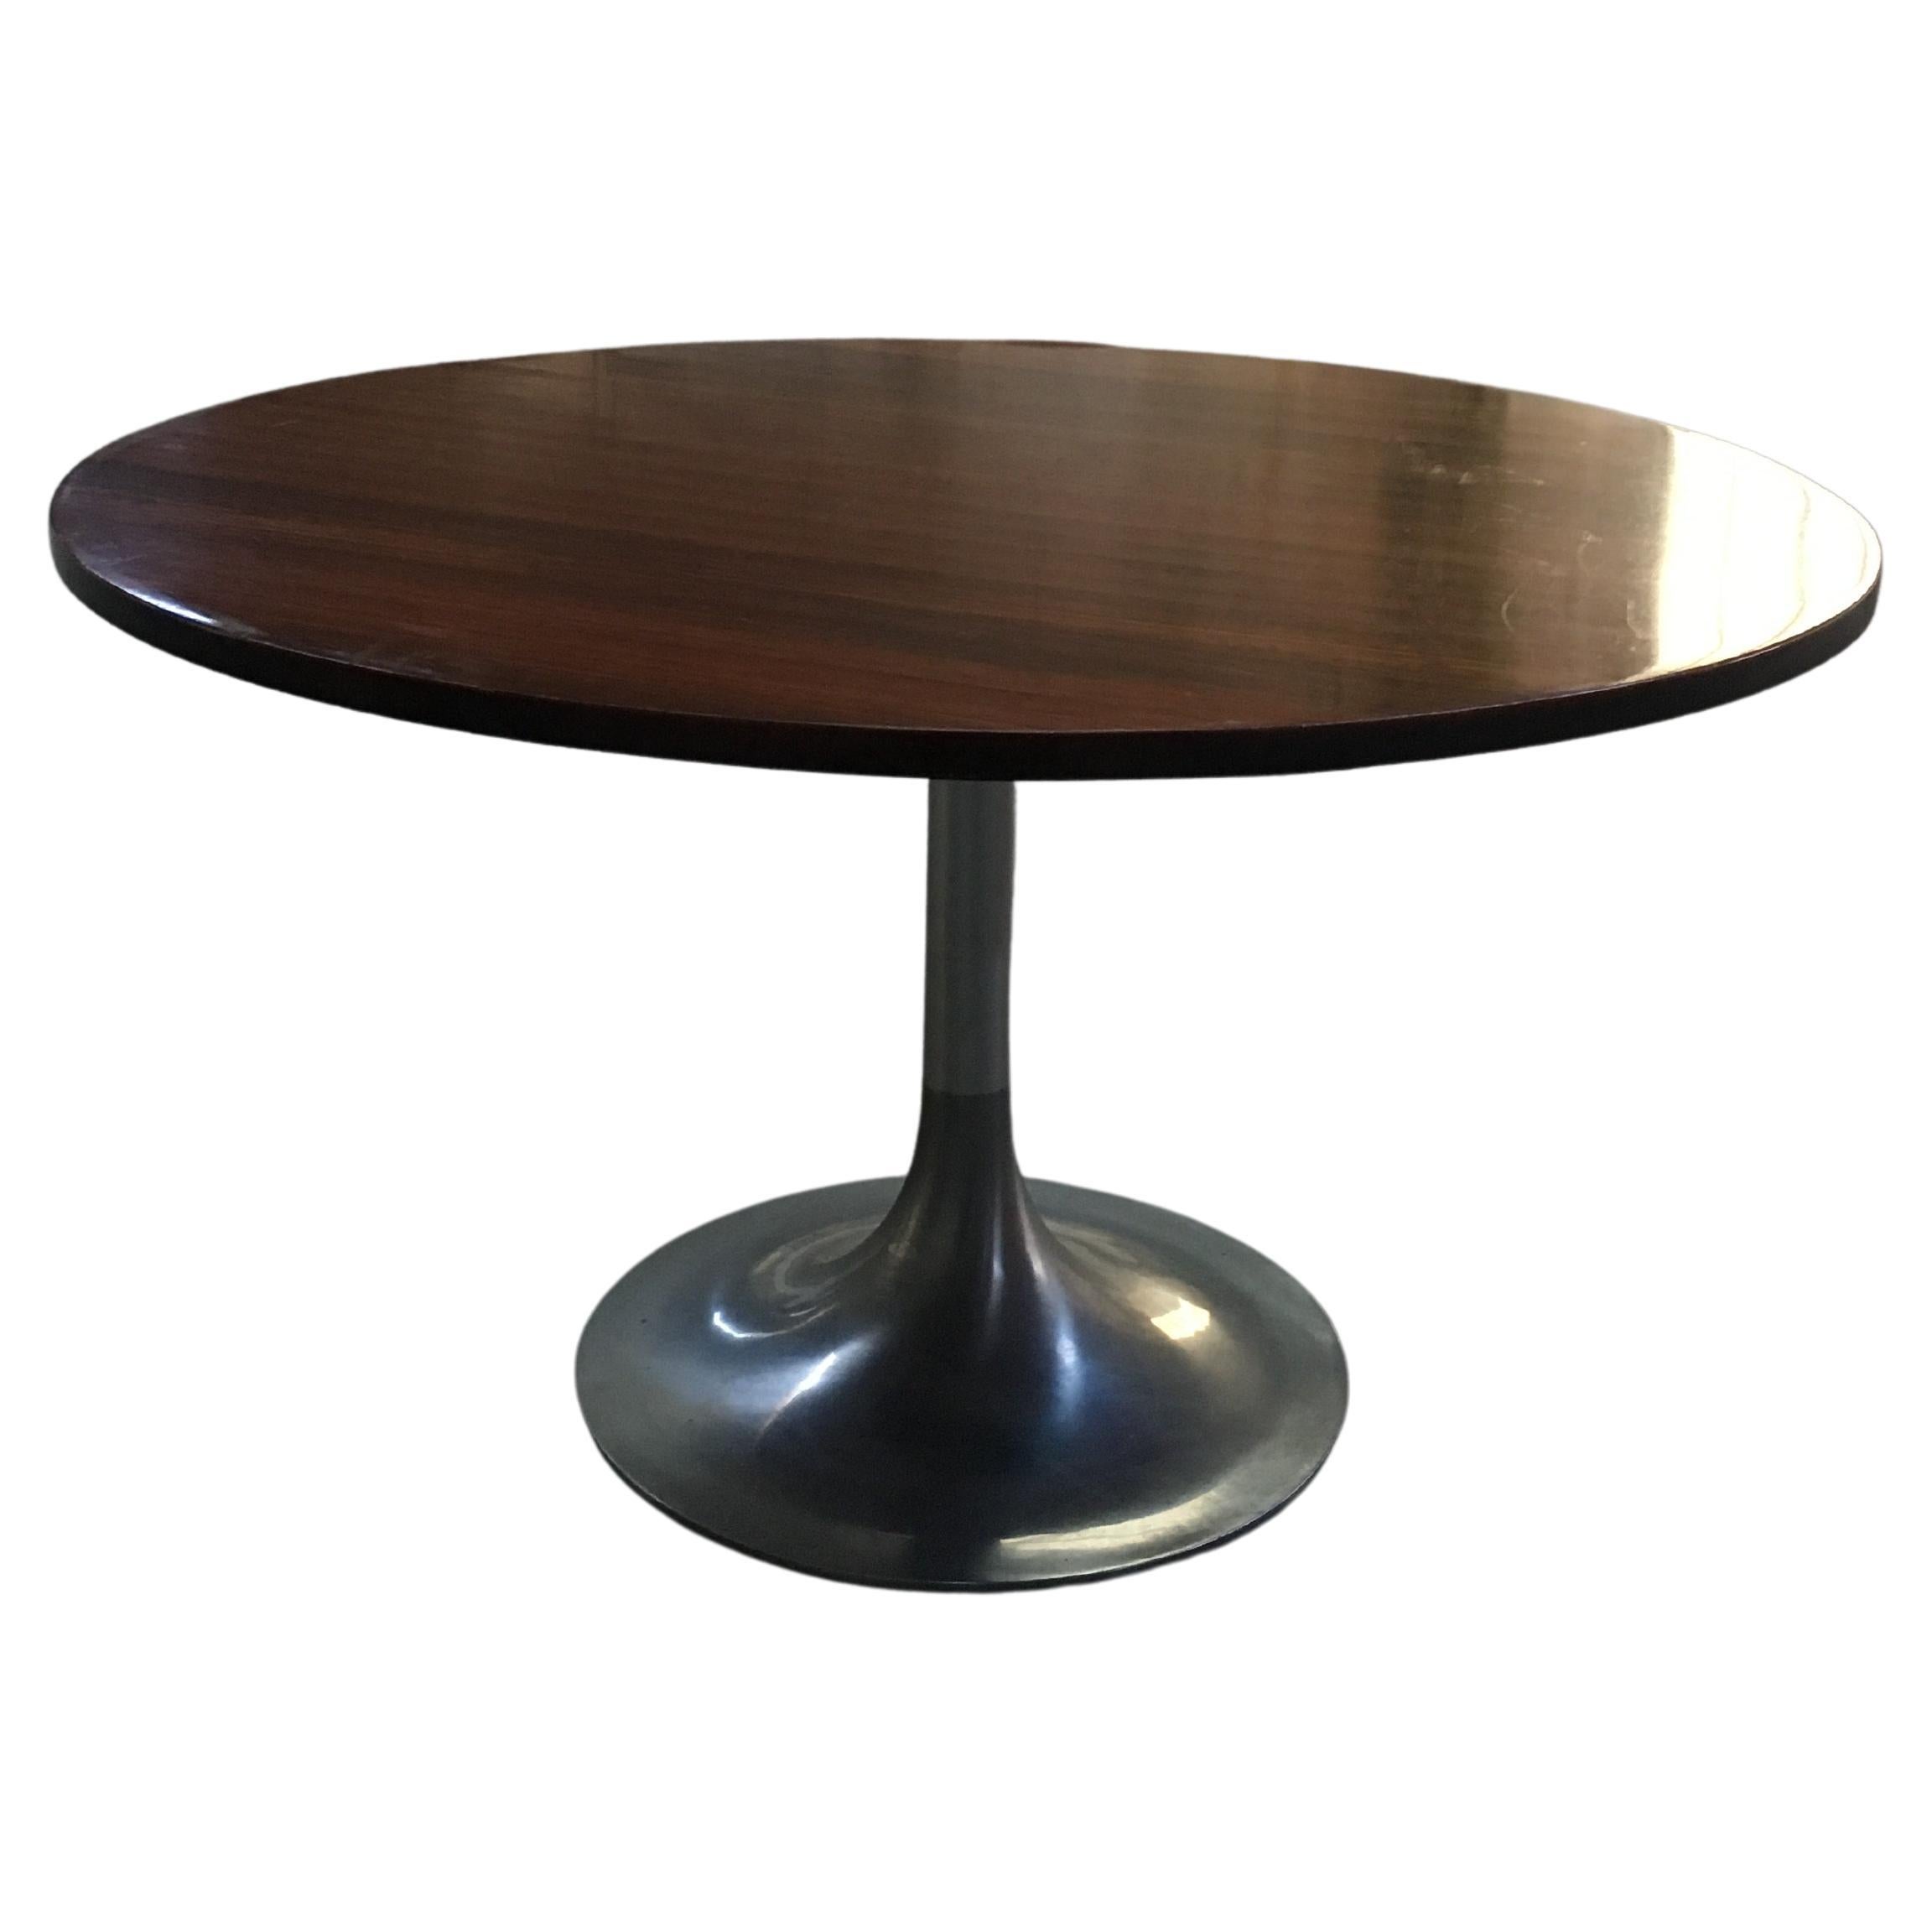 Mid-Century Modern Italian Wood Dining Table with Round Aluminum Base, 1970s For Sale